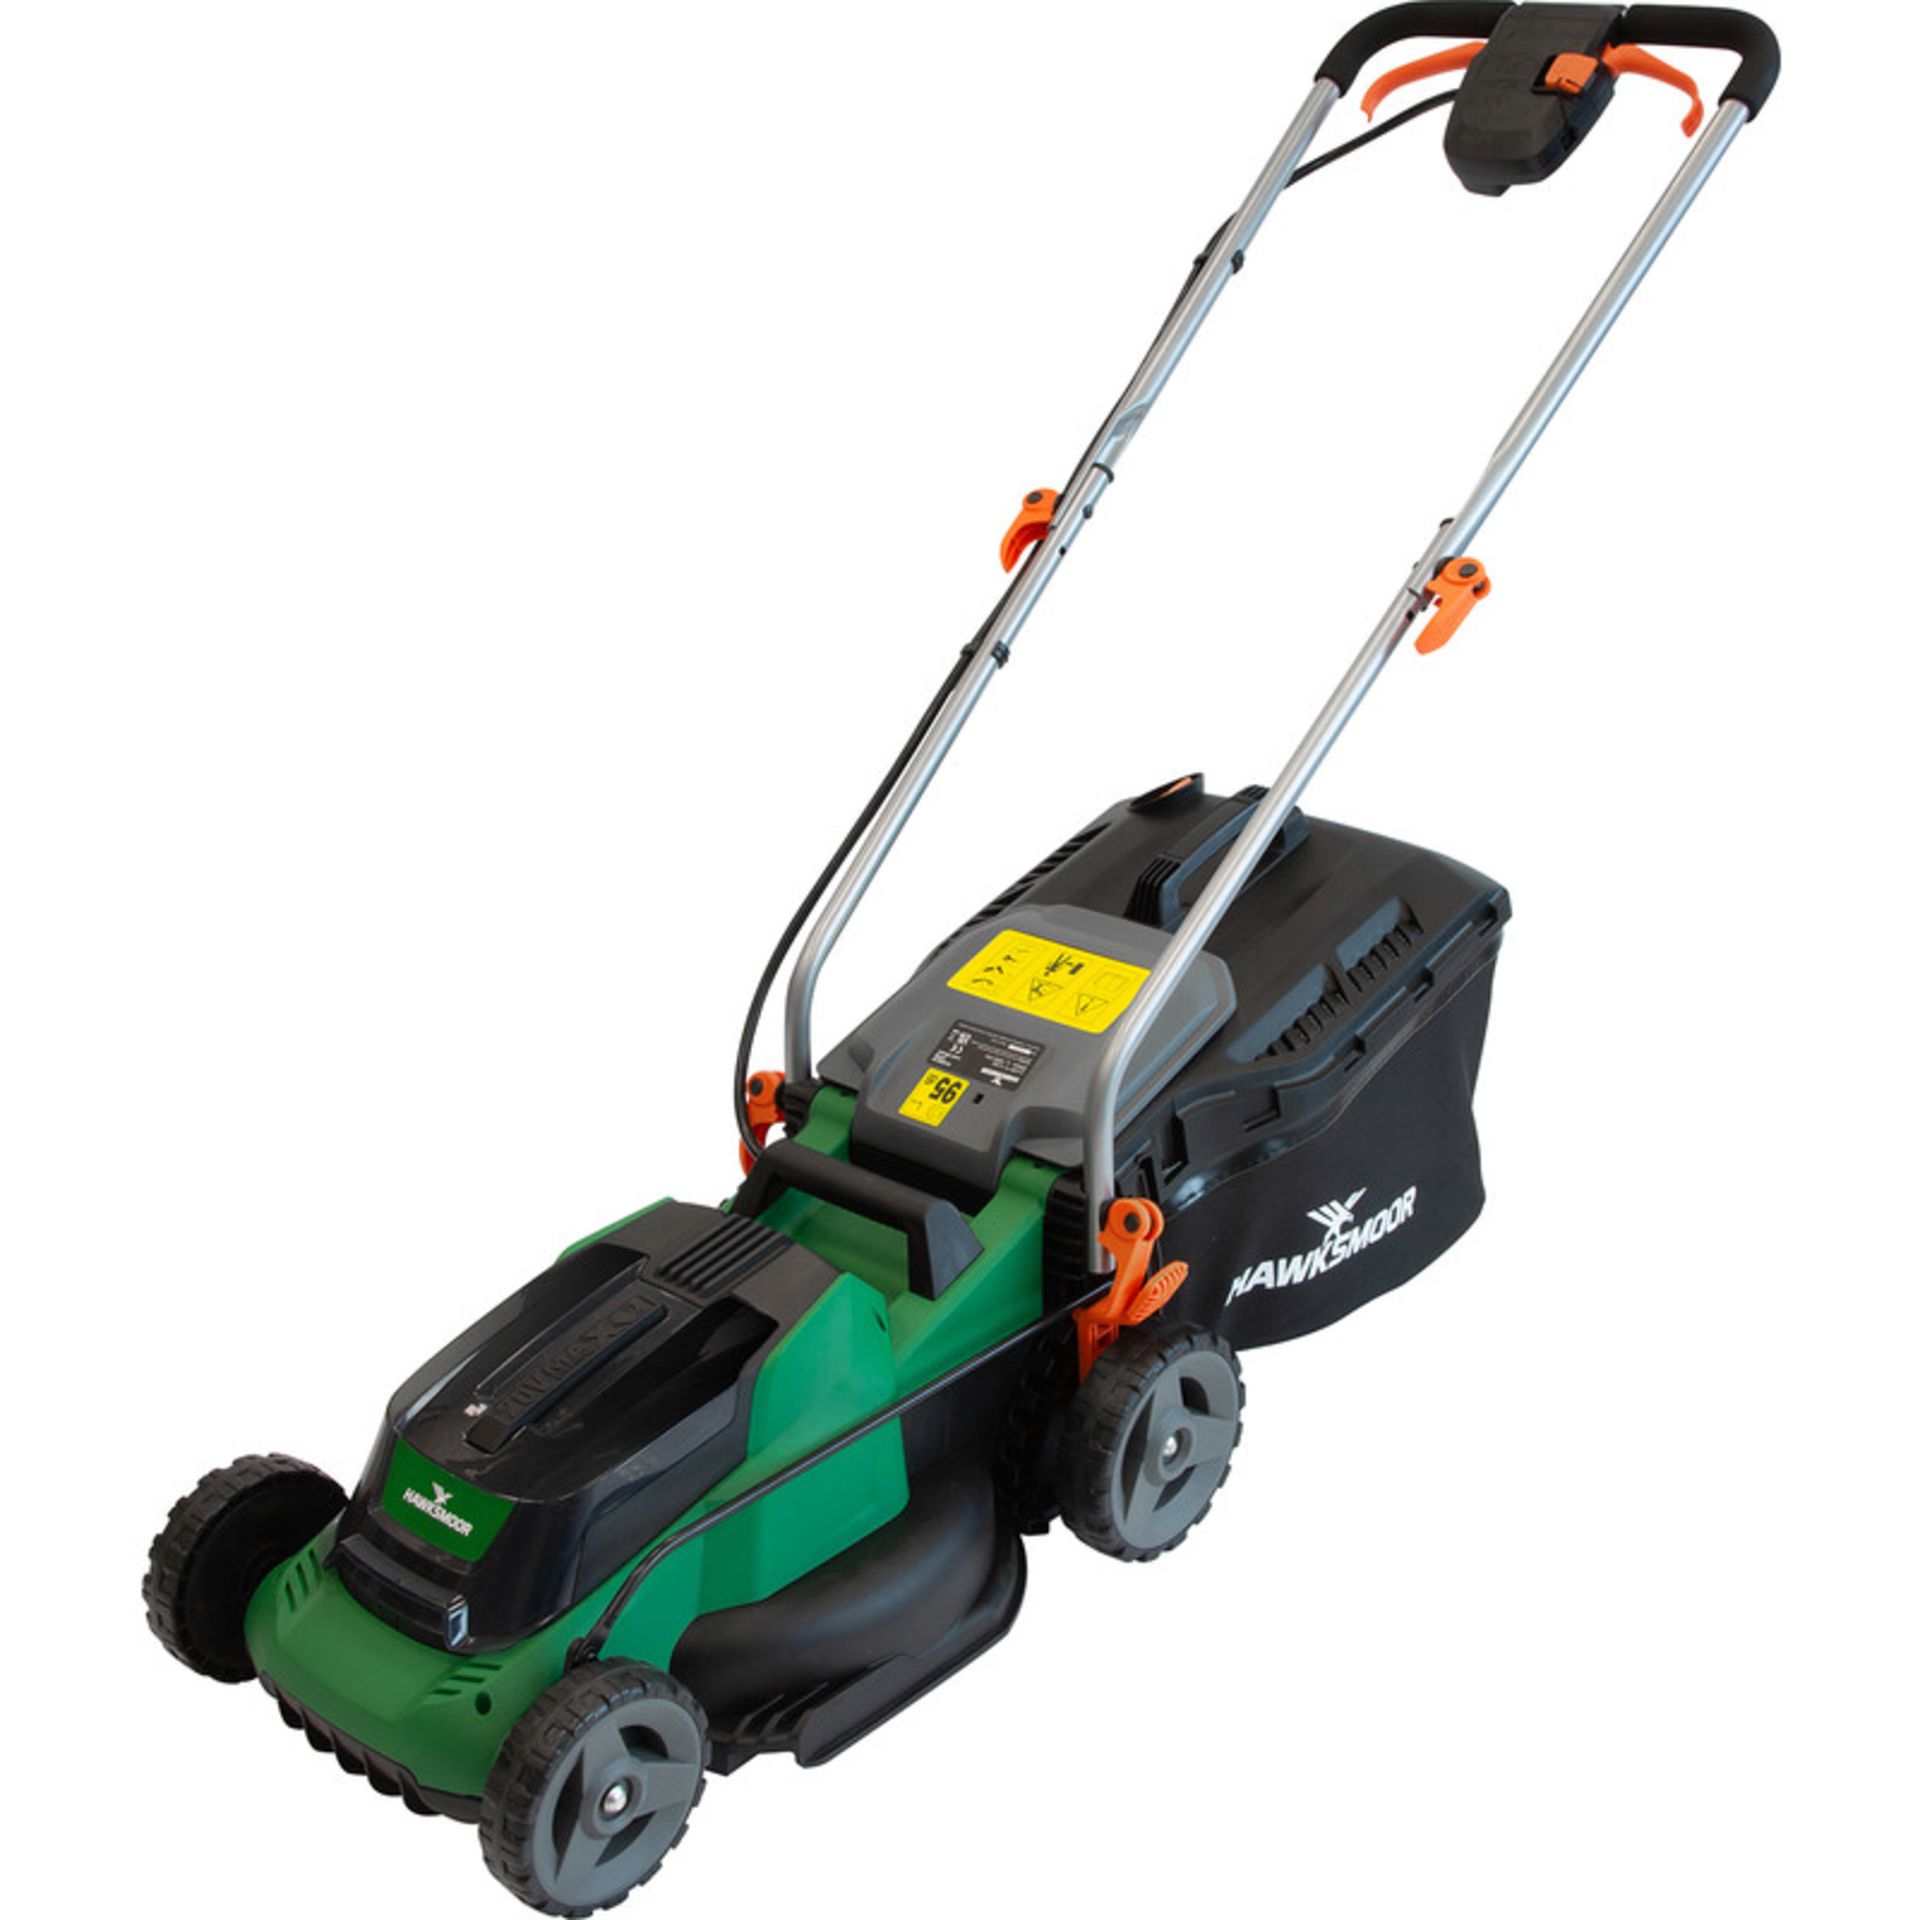 Boxed Hawksmoor 1200W 32cm Electric Lawnmower 230V. Take the hassle out of cutting your grass with